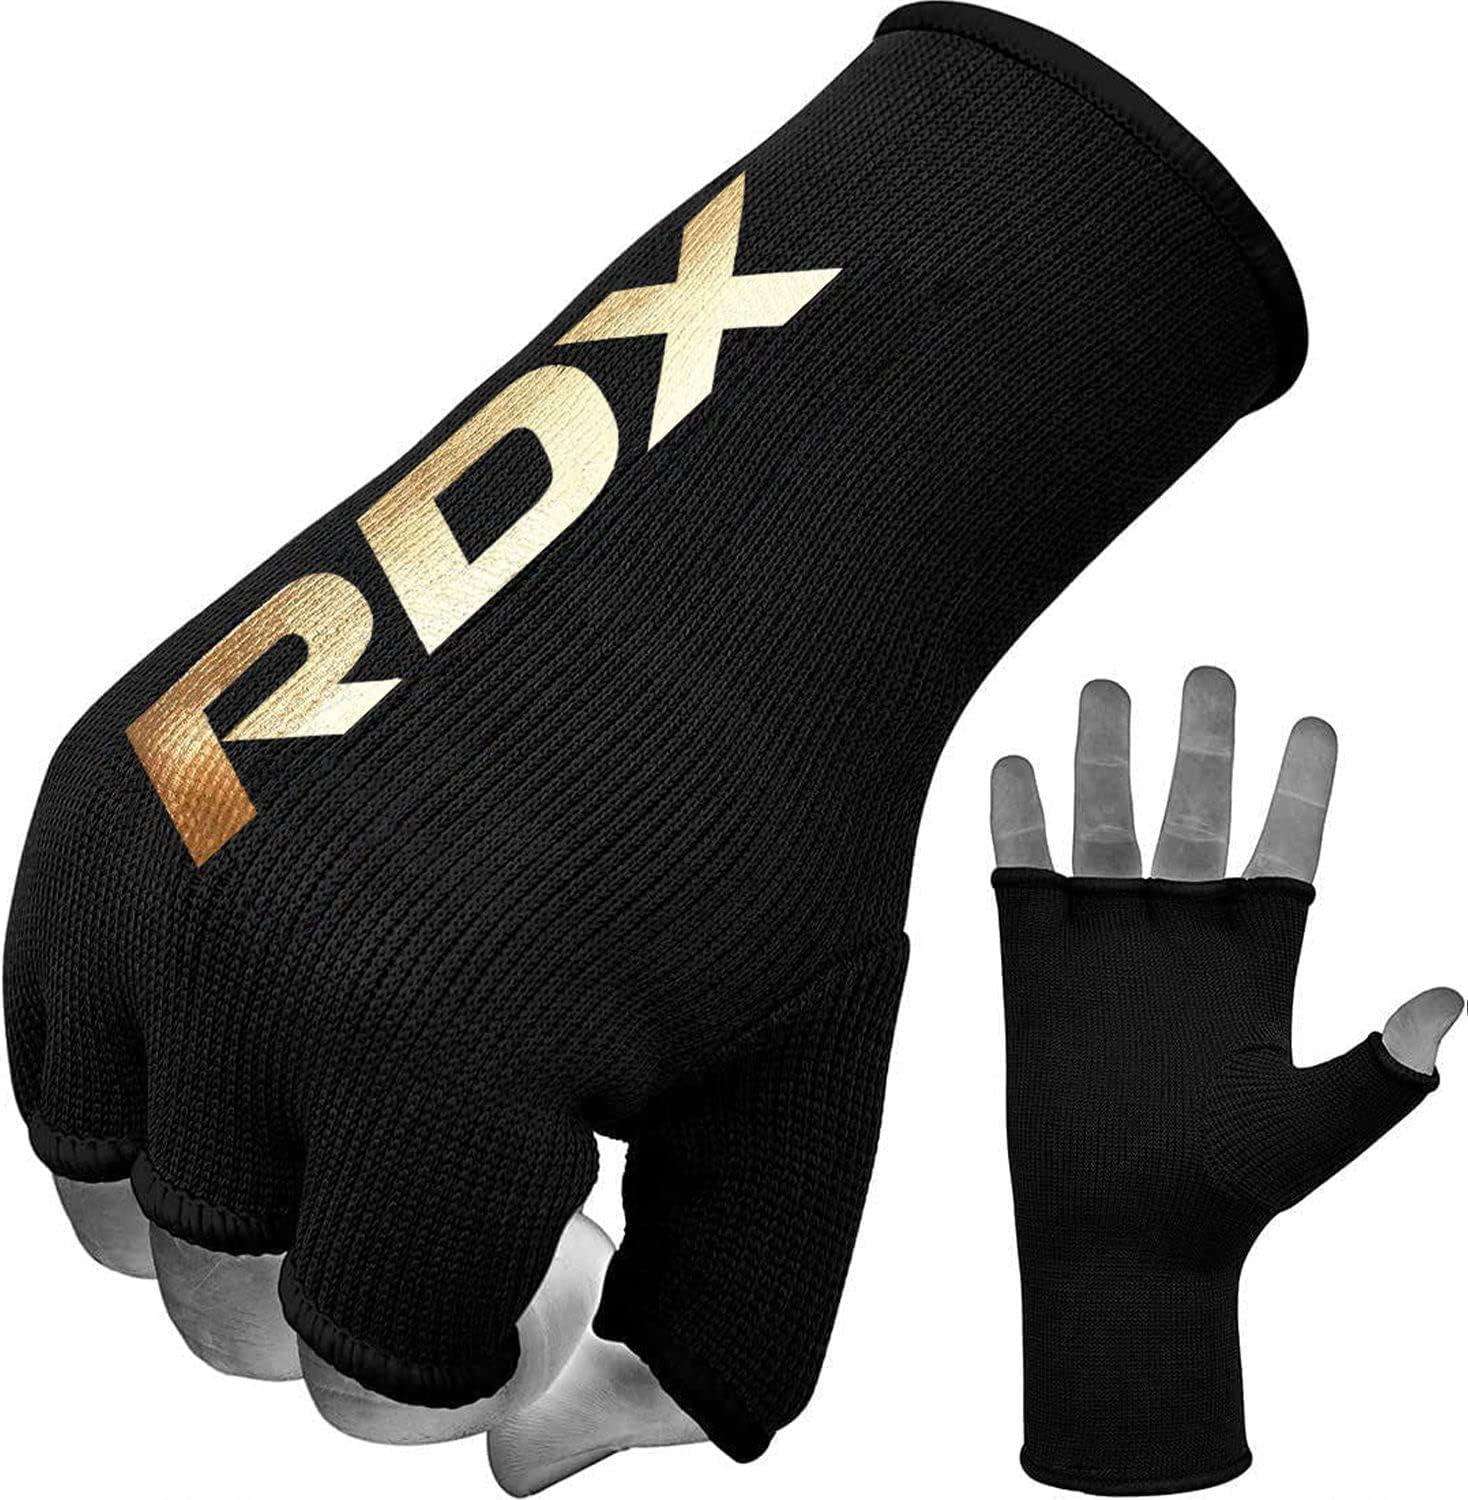  RDX Gel Boxing Hand Wraps Inner Gloves Men Women, Quick 75cm  Long Wrist Straps, Elasticated Padded Fist Under Mitts Protection, Muay  Thai MMA Kickboxing Martial Arts Punching Training Bandages 